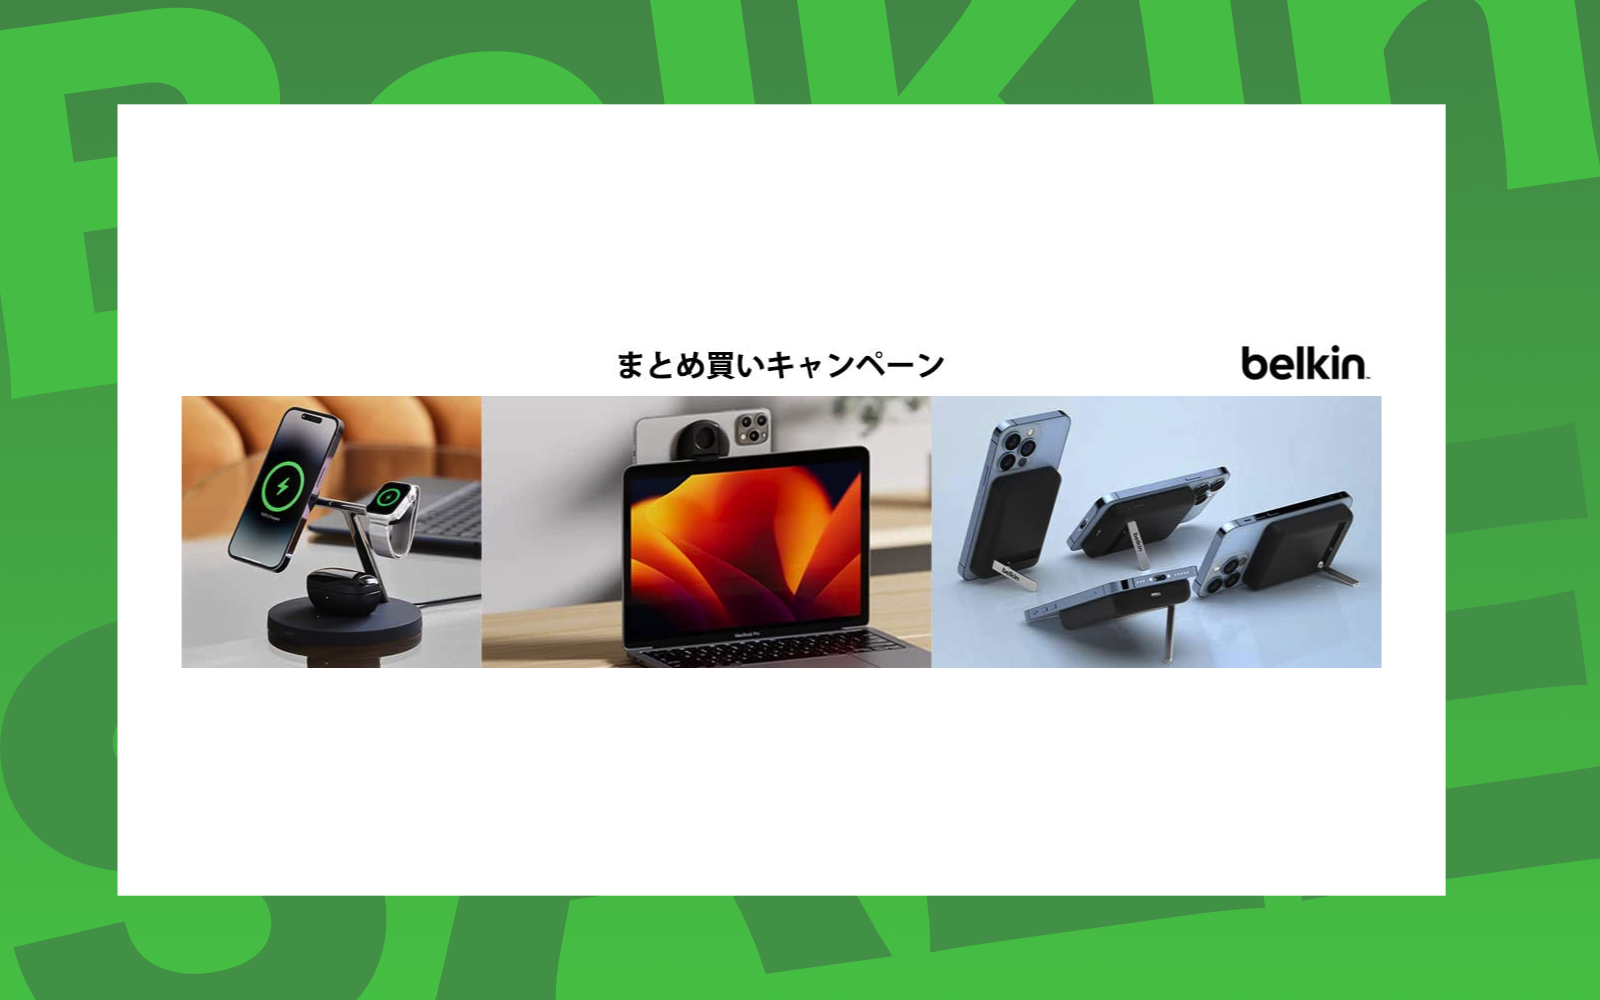 Belkin Sale with apple products